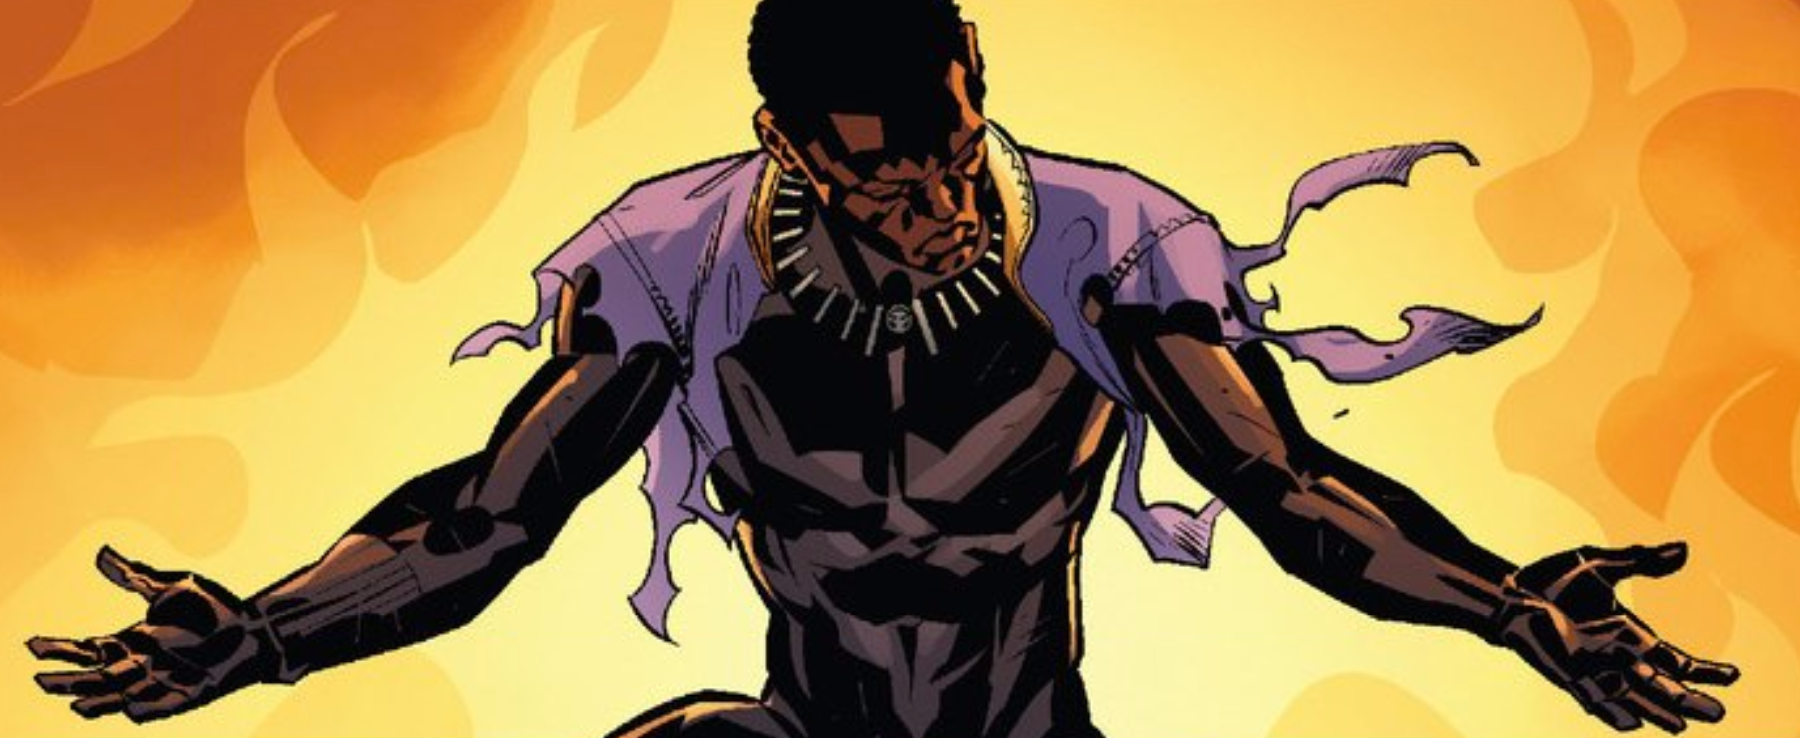 Black Panther, Vol. 1 by Ta-Nehisi Coates